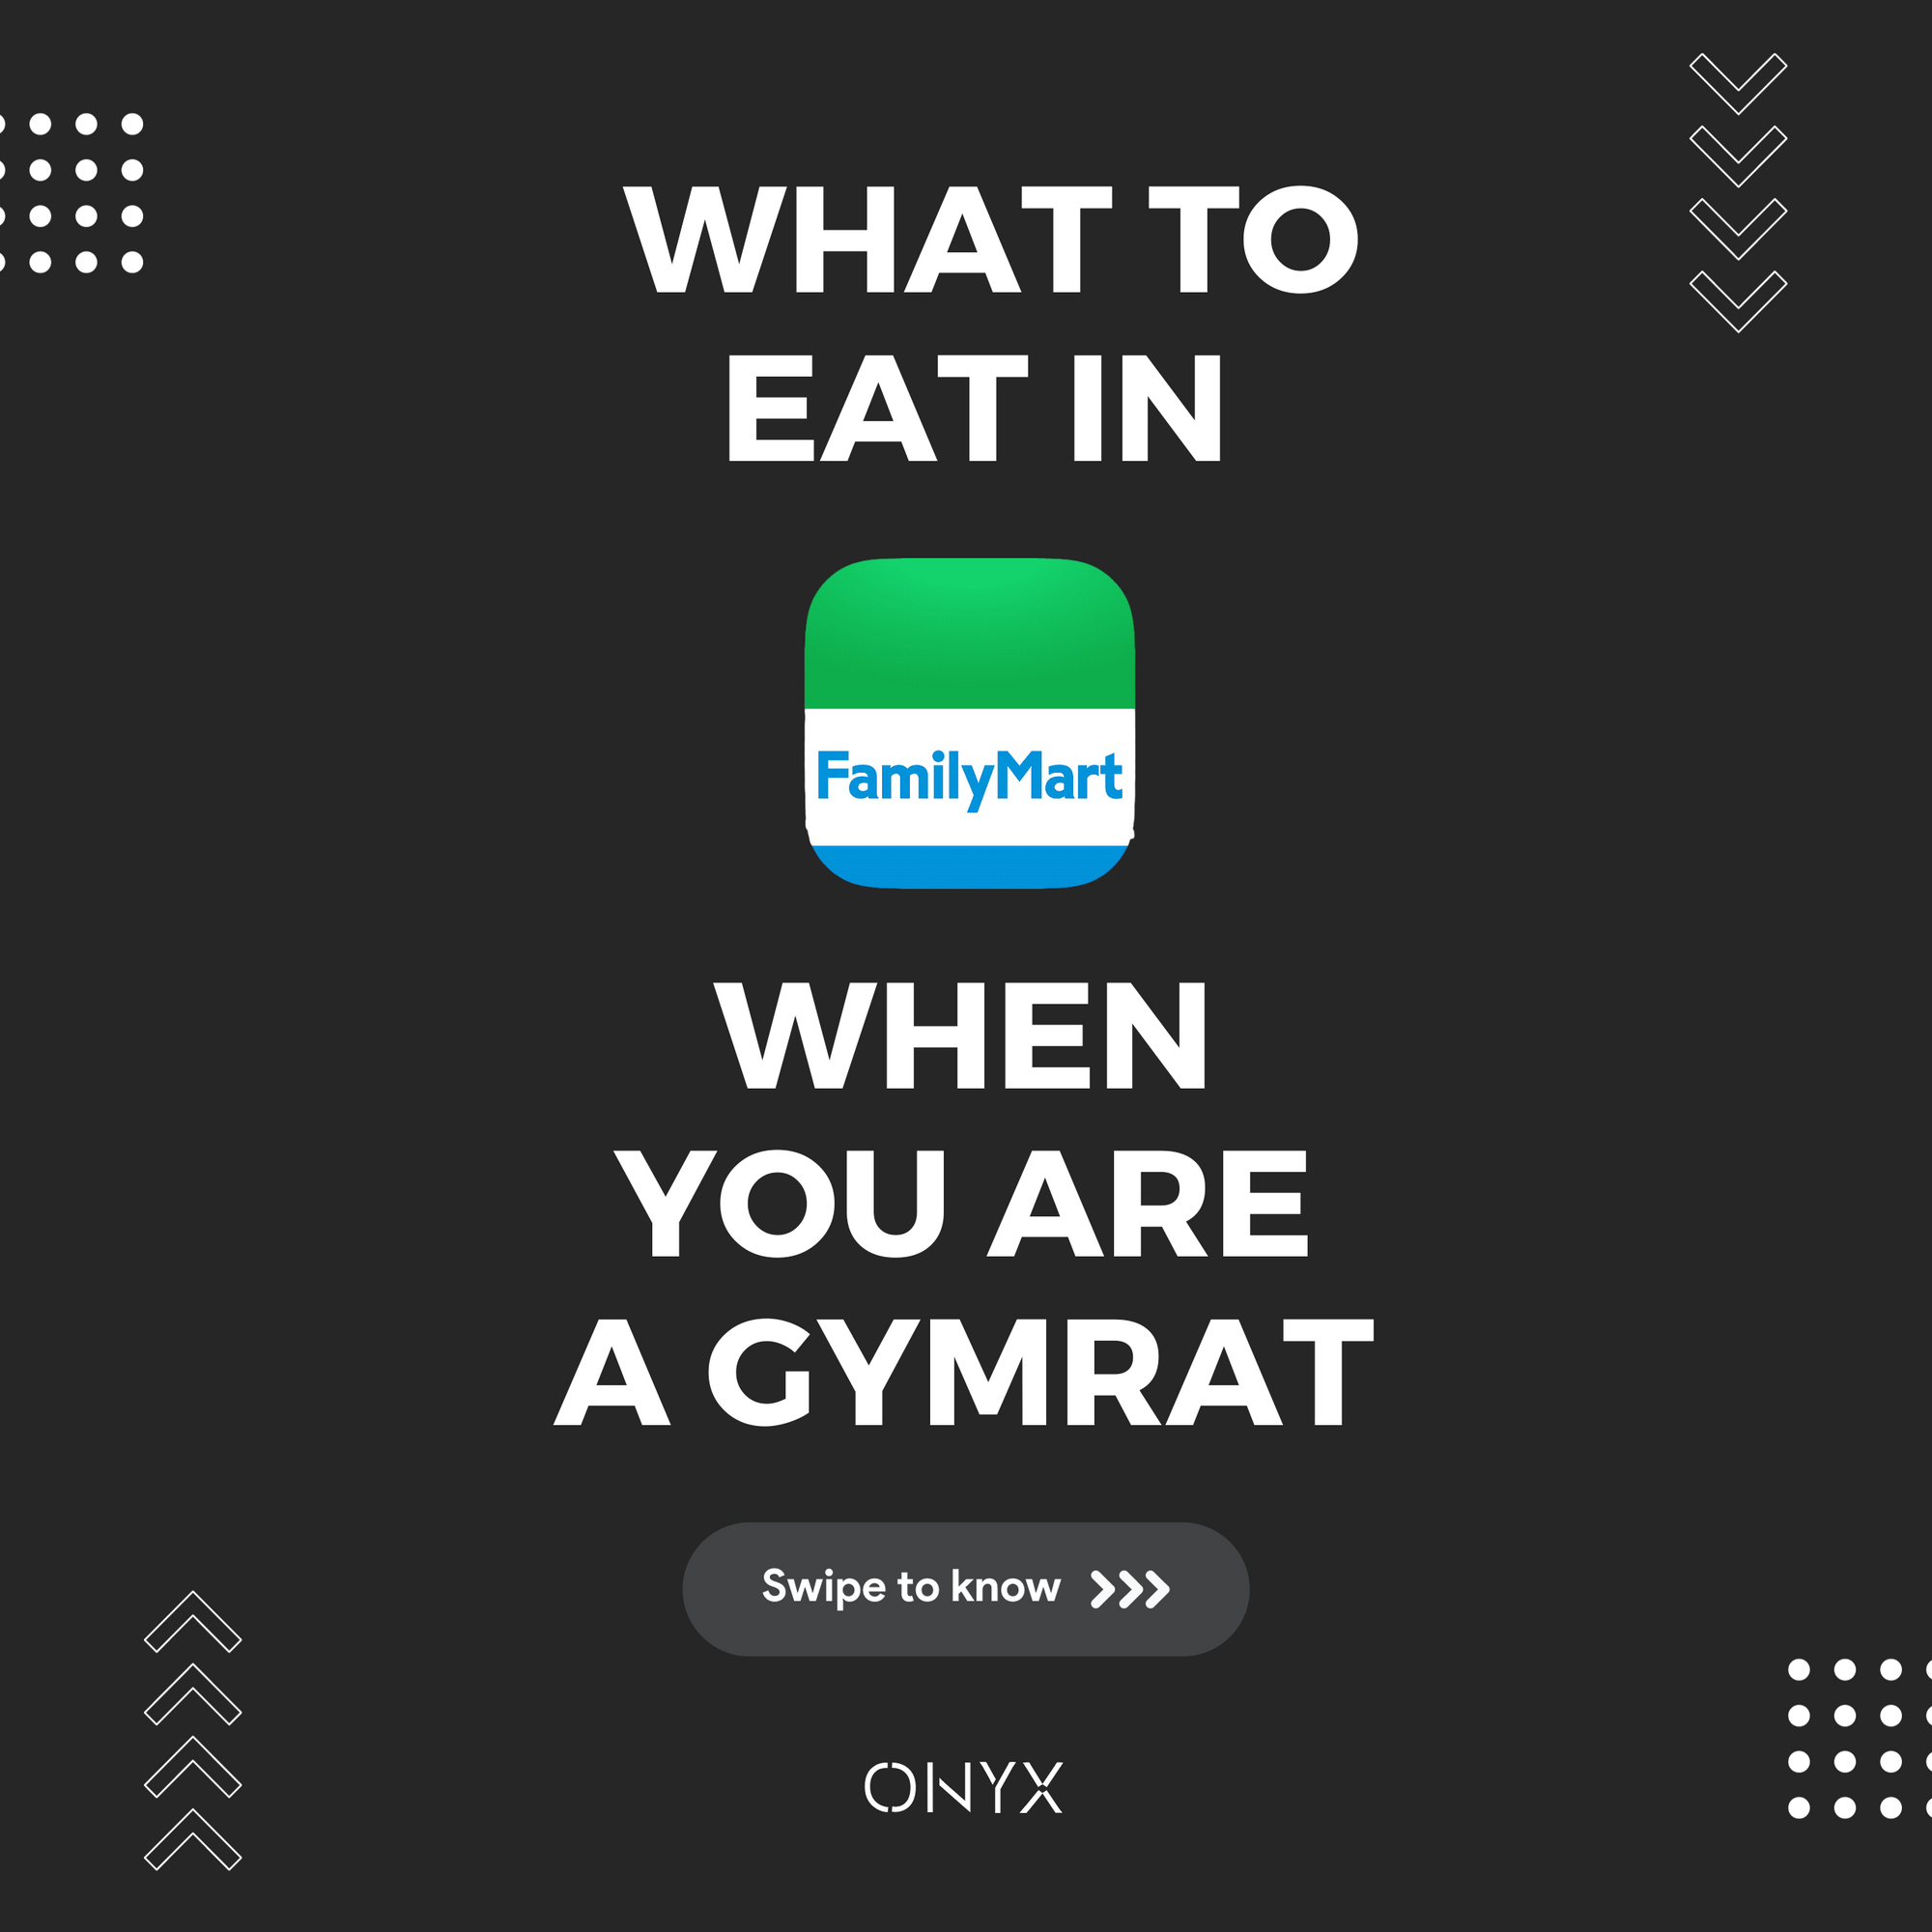 What to eat in Family Mart as a gymrat?